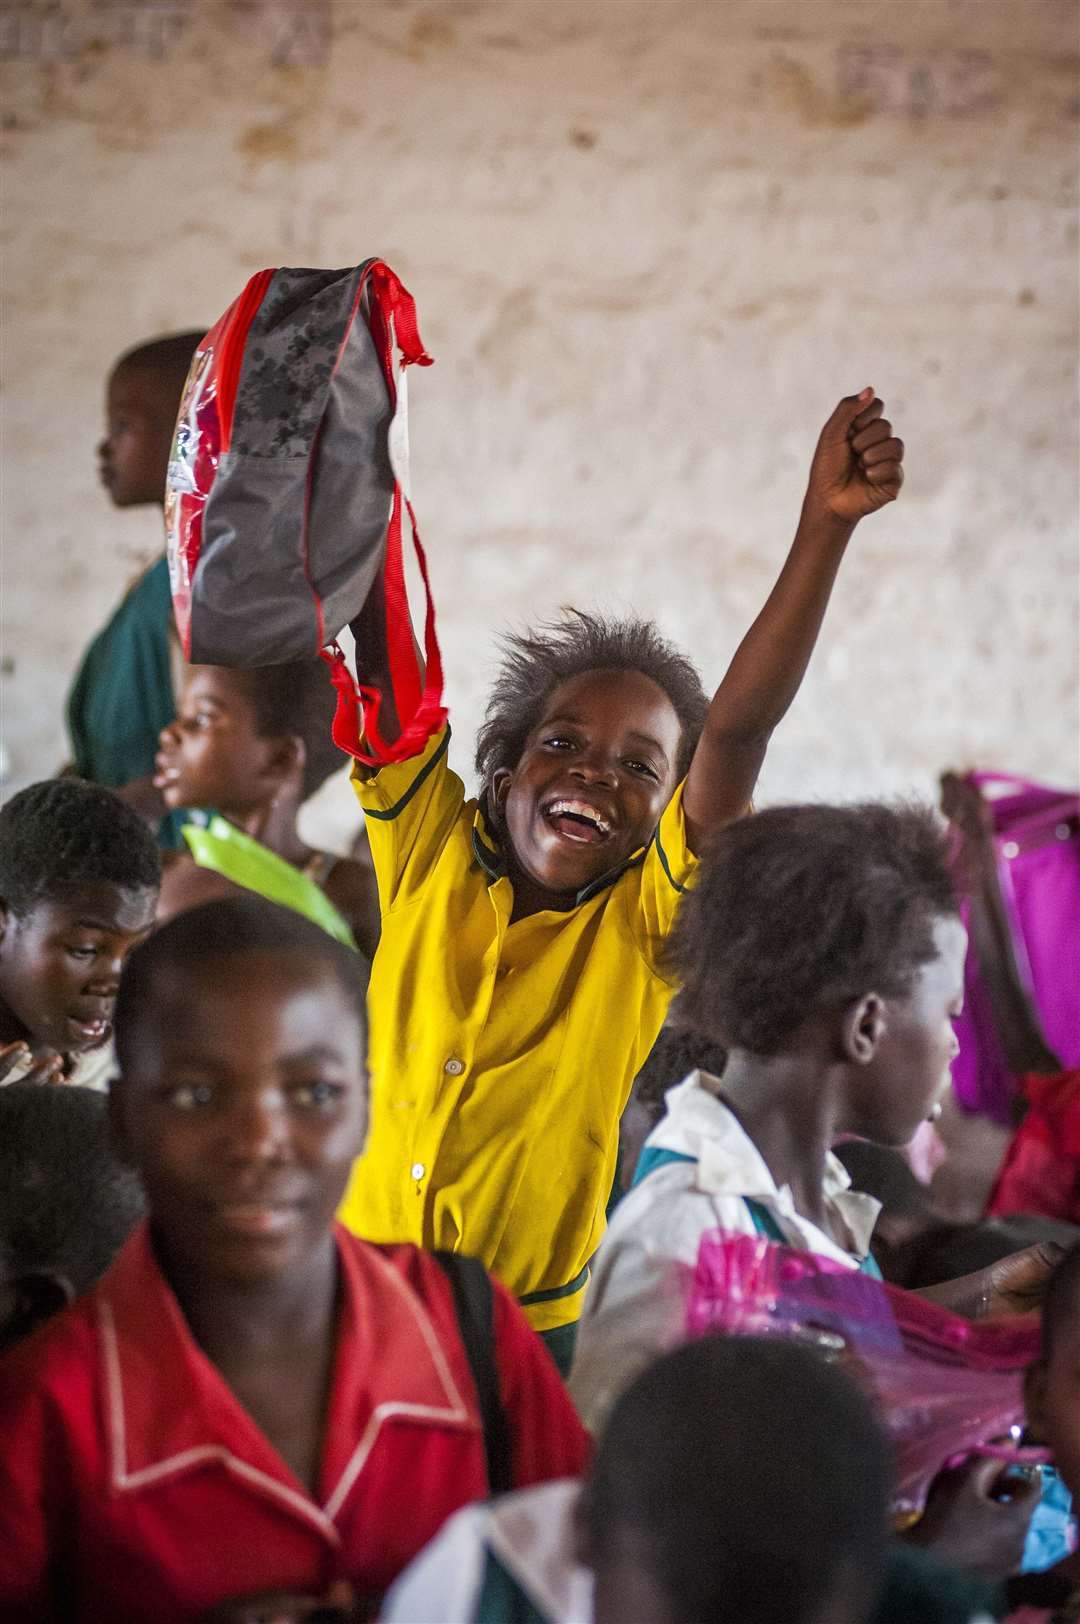 The Backpack Project helps children in Malawi.